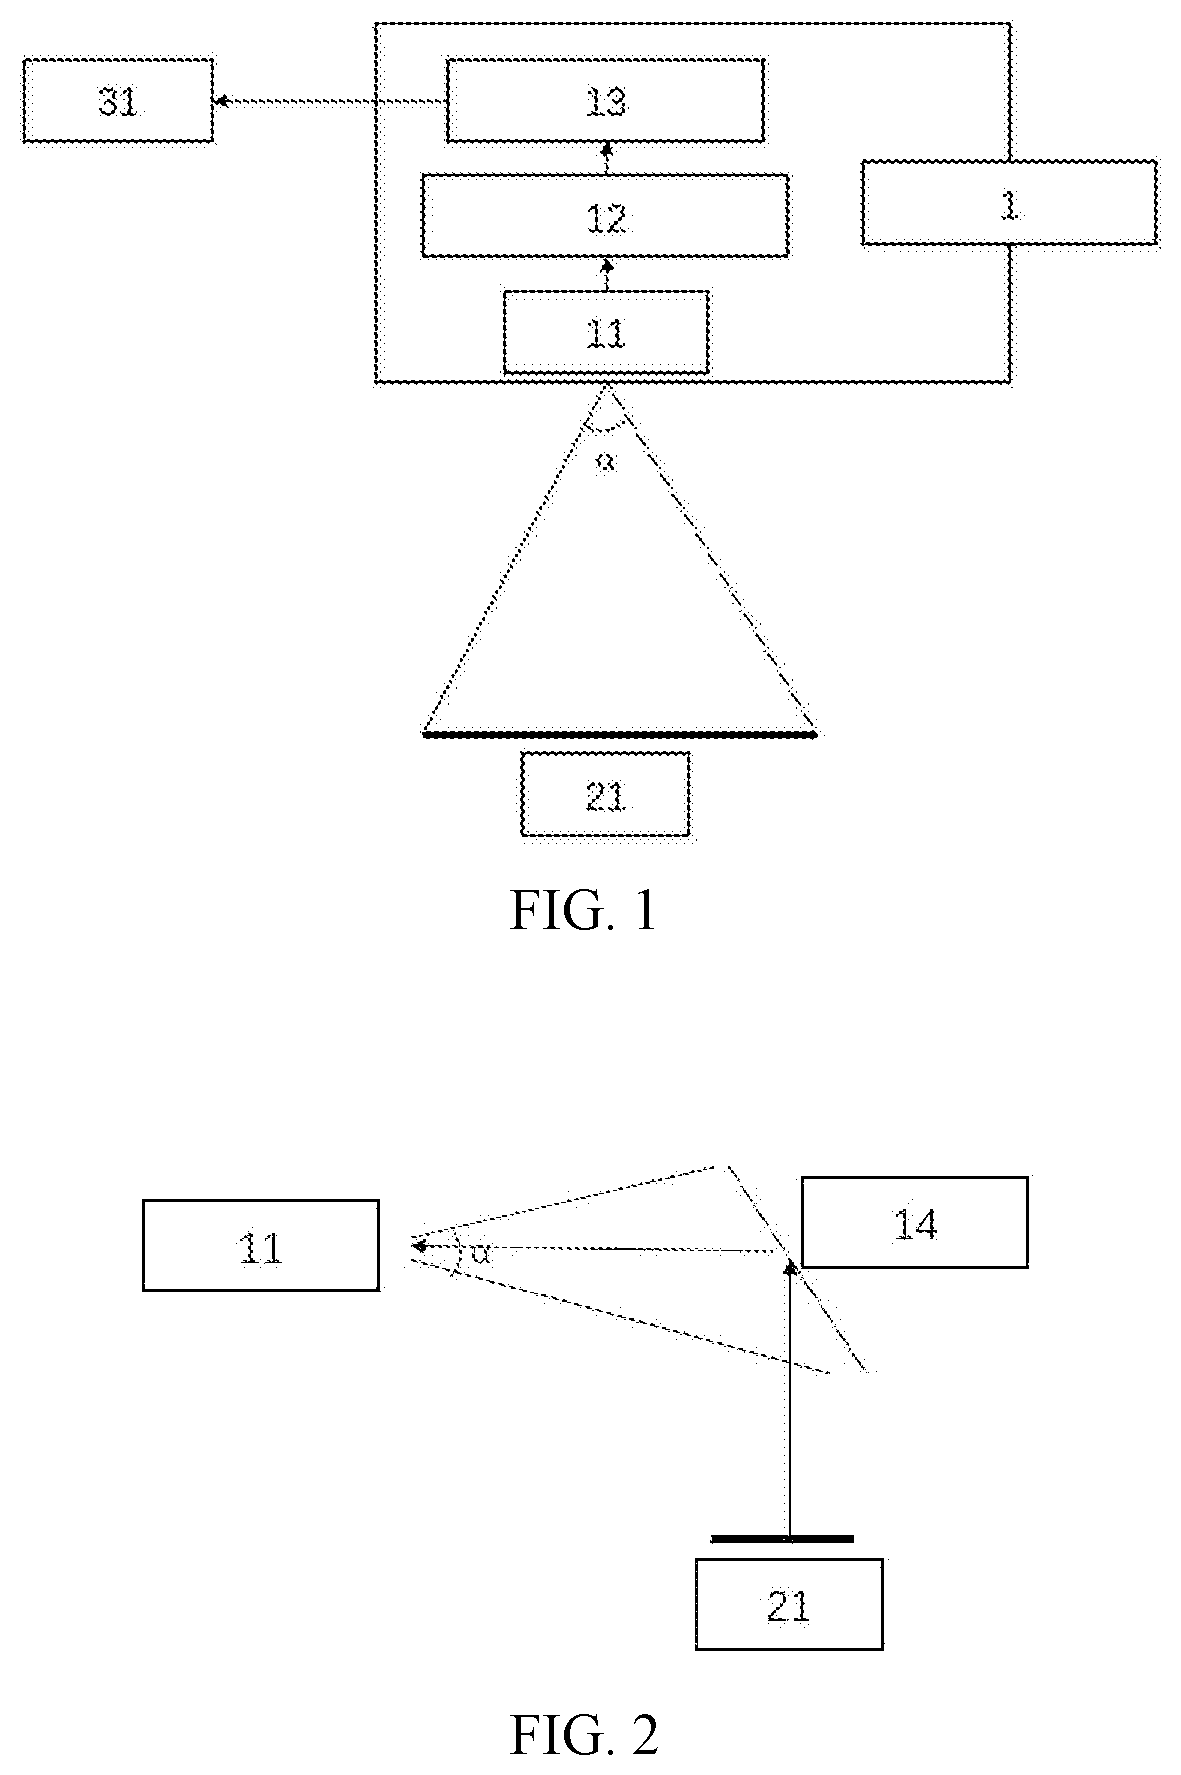 Real-time monitoring system, elevator or escalator comprising the same, and a method therefor